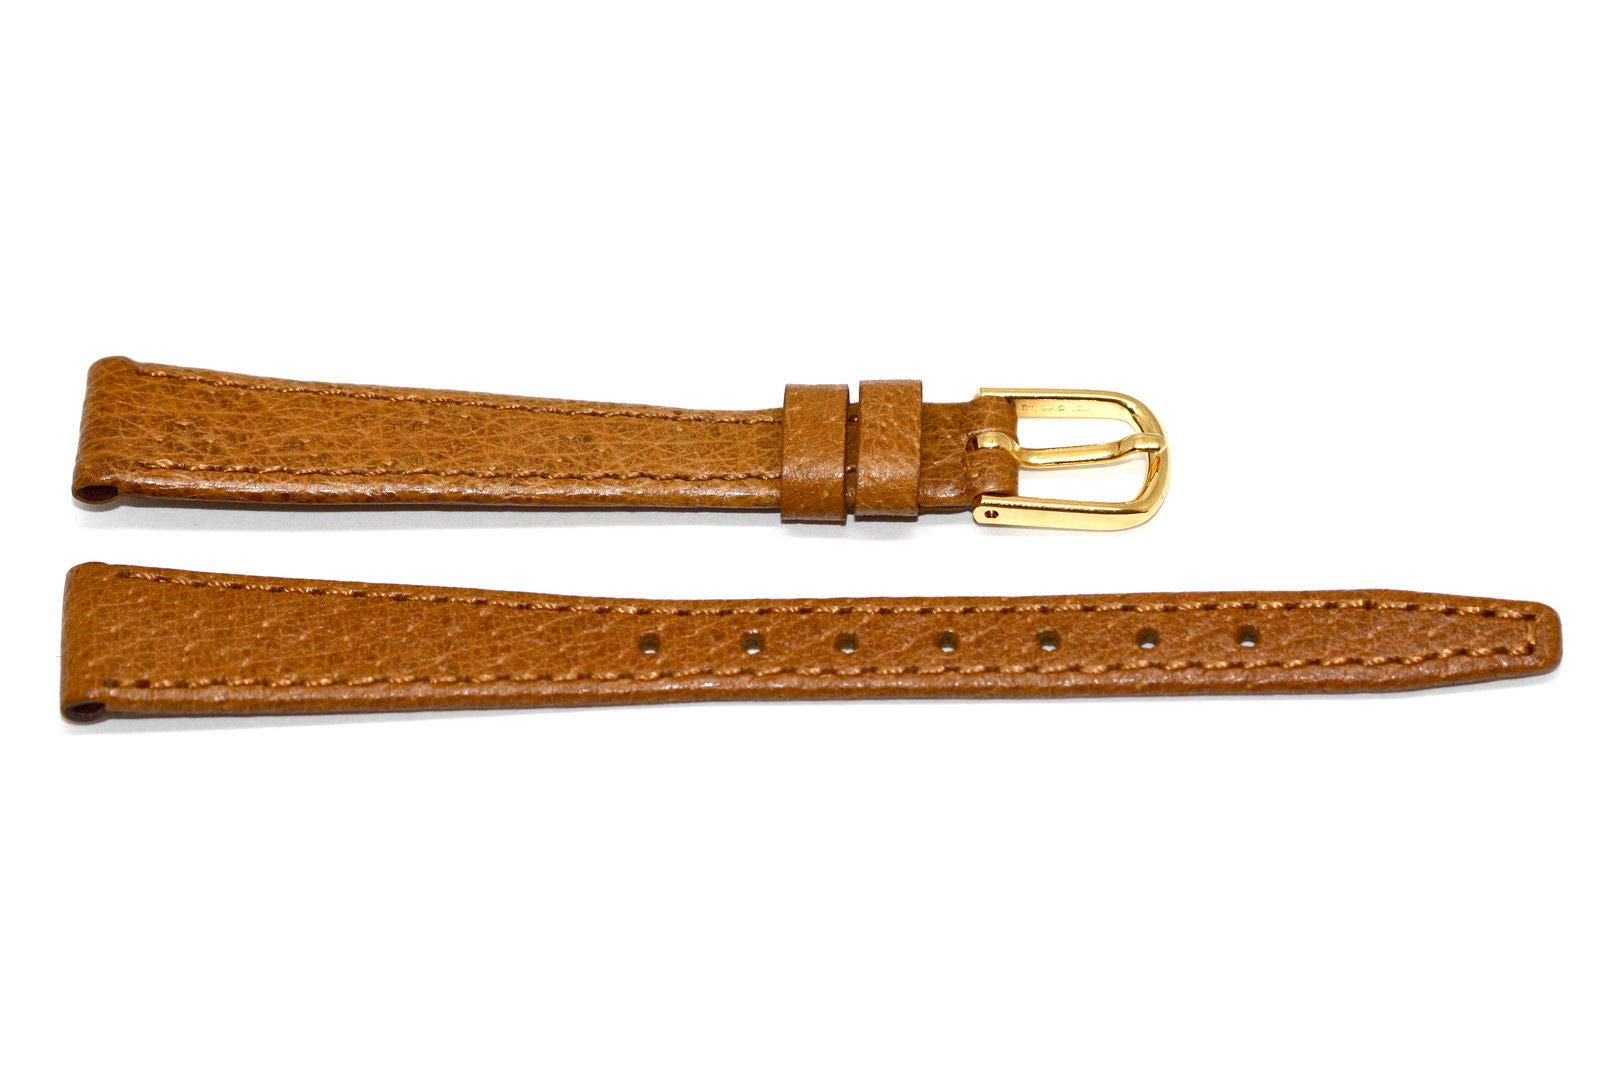 13MM Stitched Thin Soft Leather Pigskin Strap Watch Band